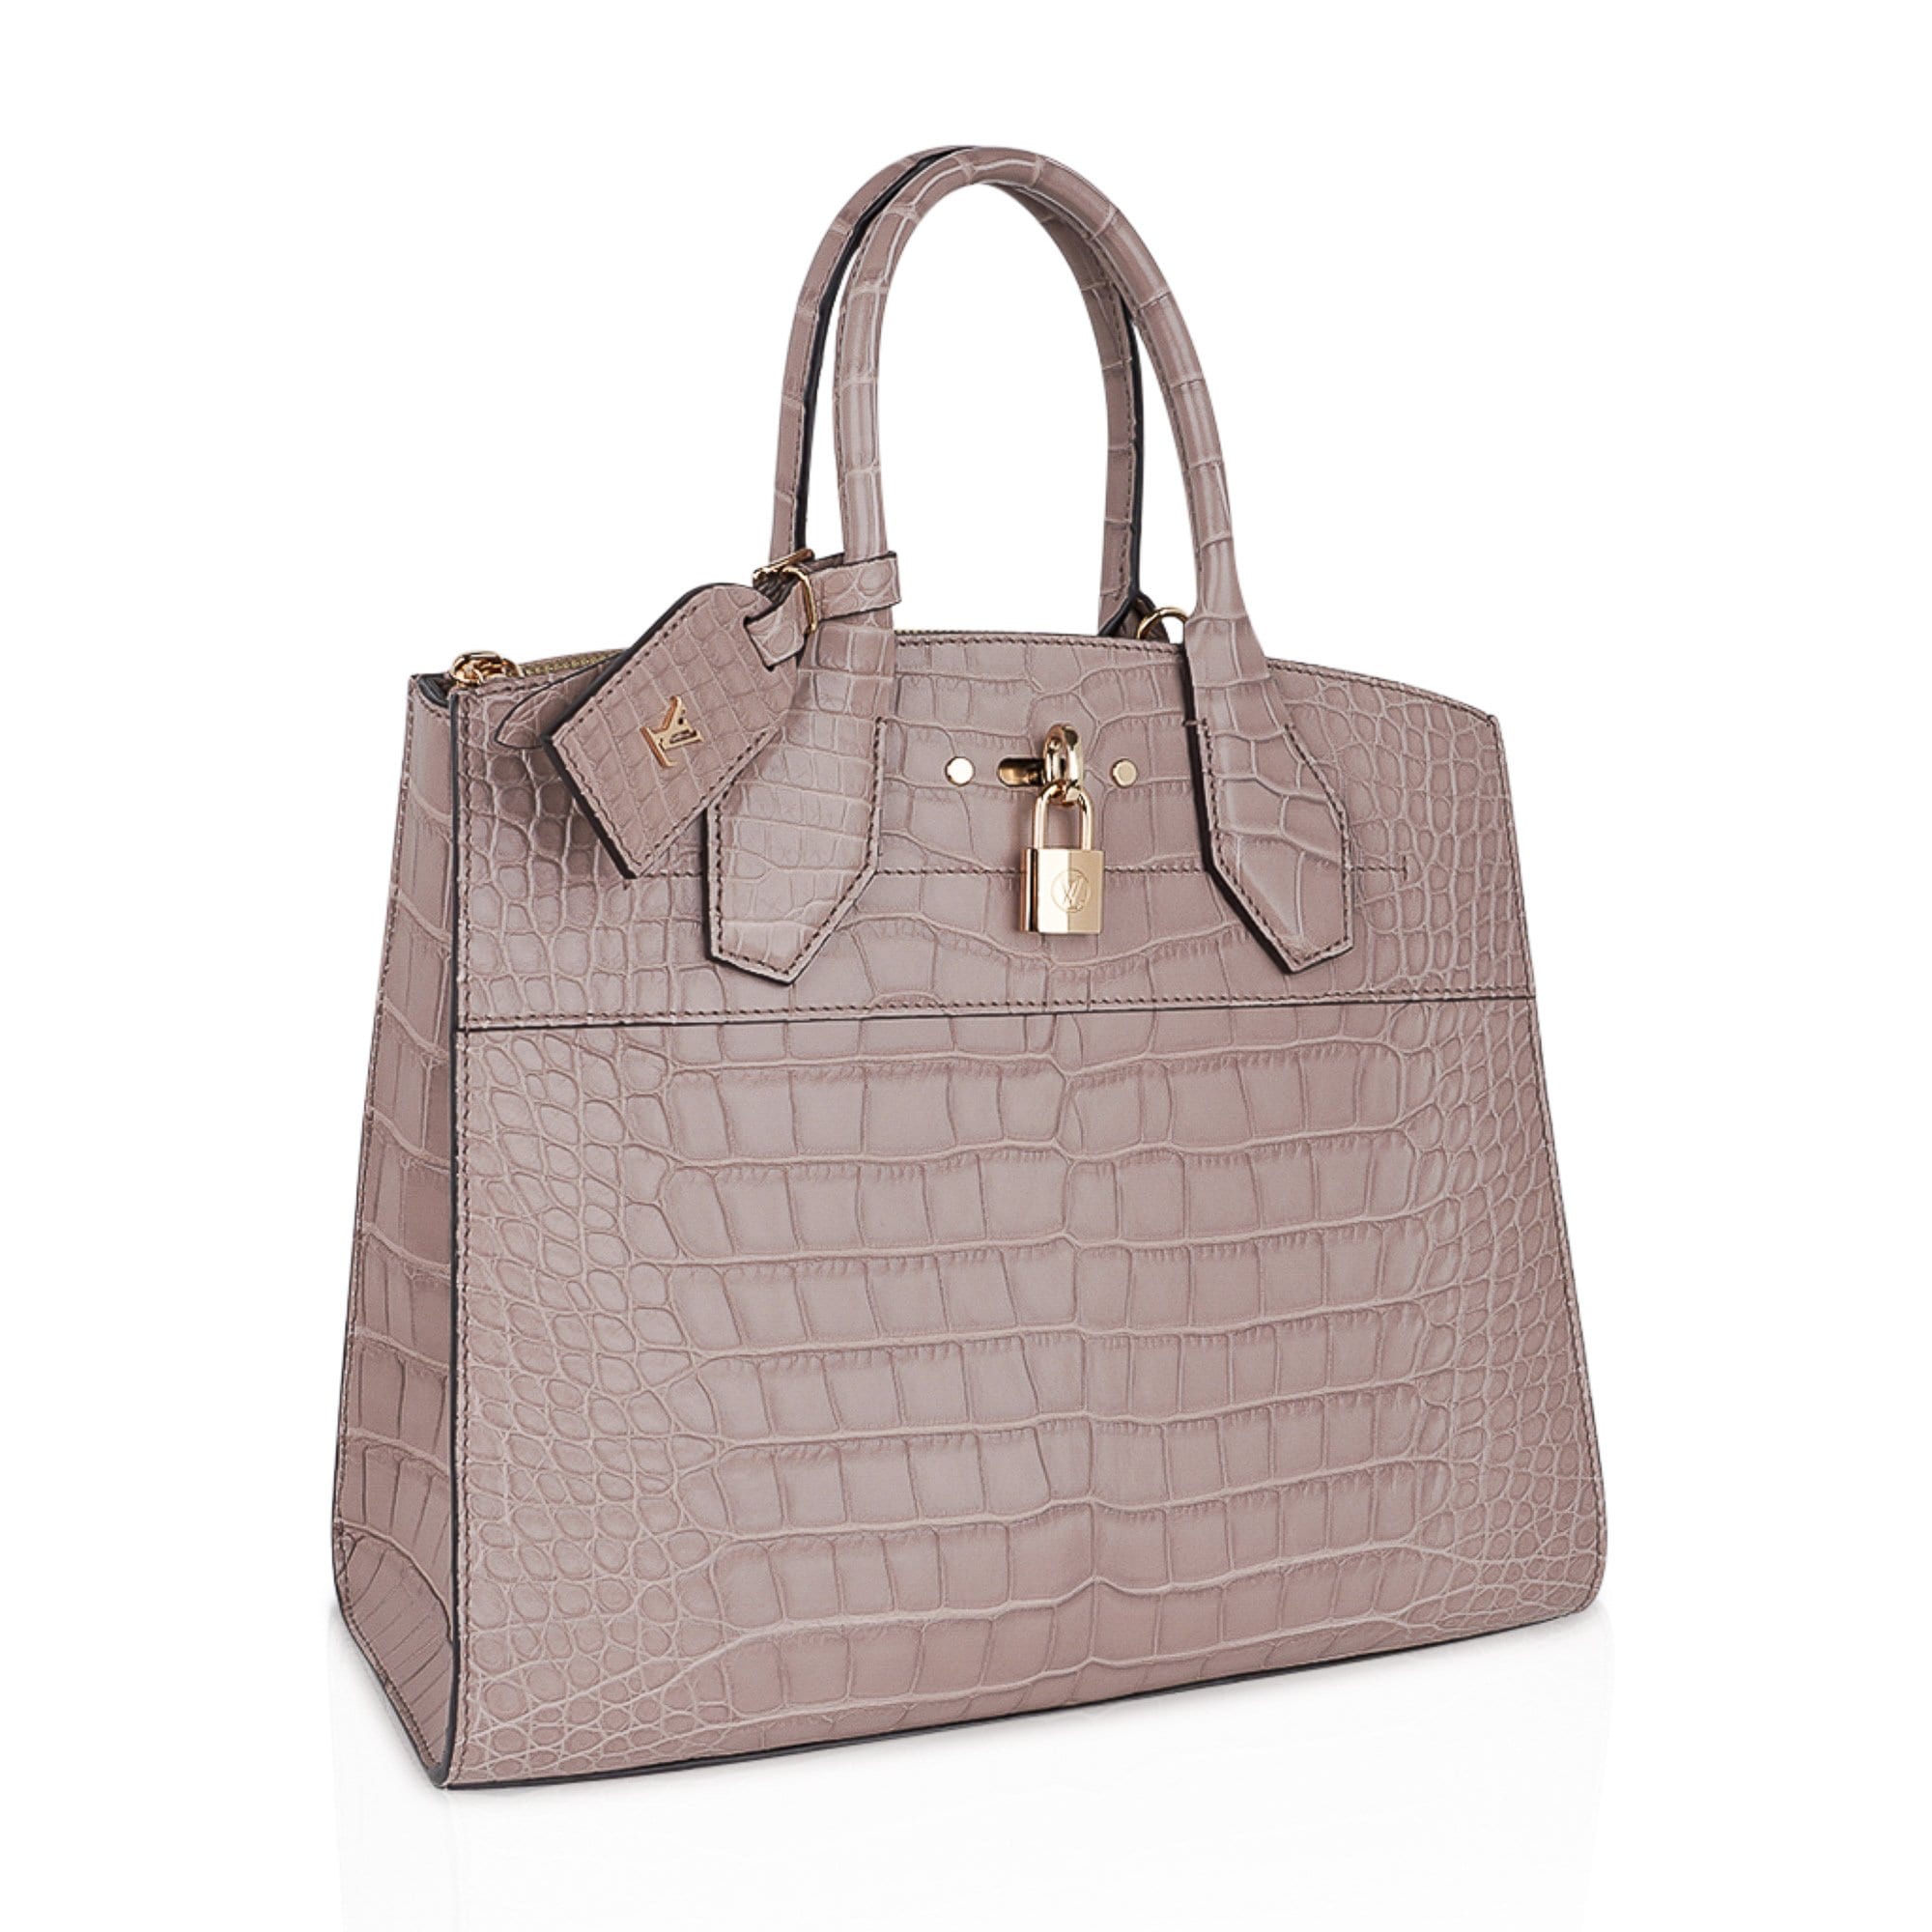 Louis Vuitton City Steamer Bag Taupe Matte Crocodile Limited Edition New w/Box